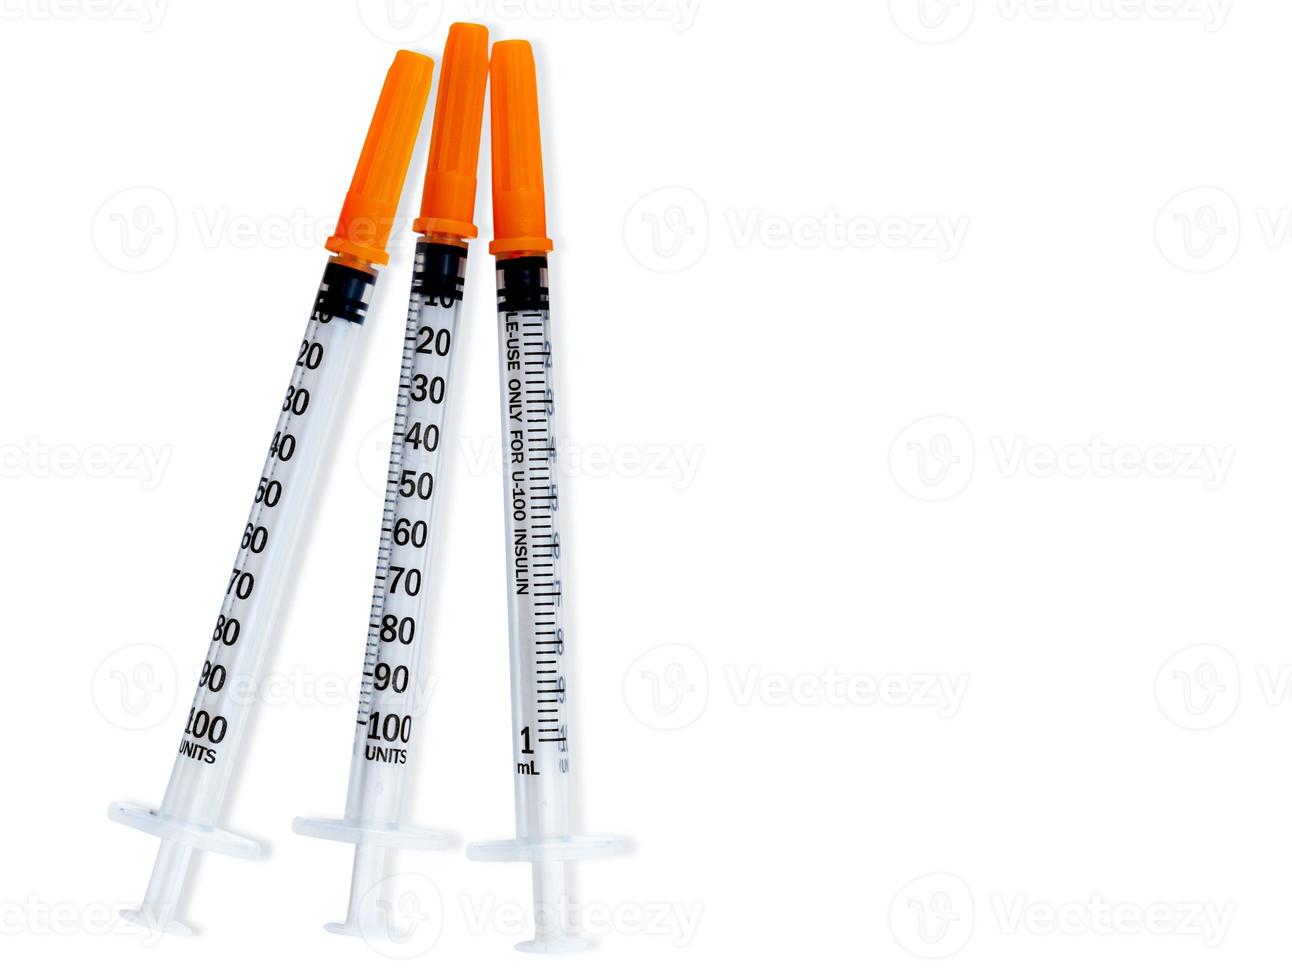 Plastic insulin syringes for diabetes. Needle for addict. Three insulin syringes with orange cover isolated on white background. Injection medicine. Medical equipment for diabetic. Vaccination concept photo